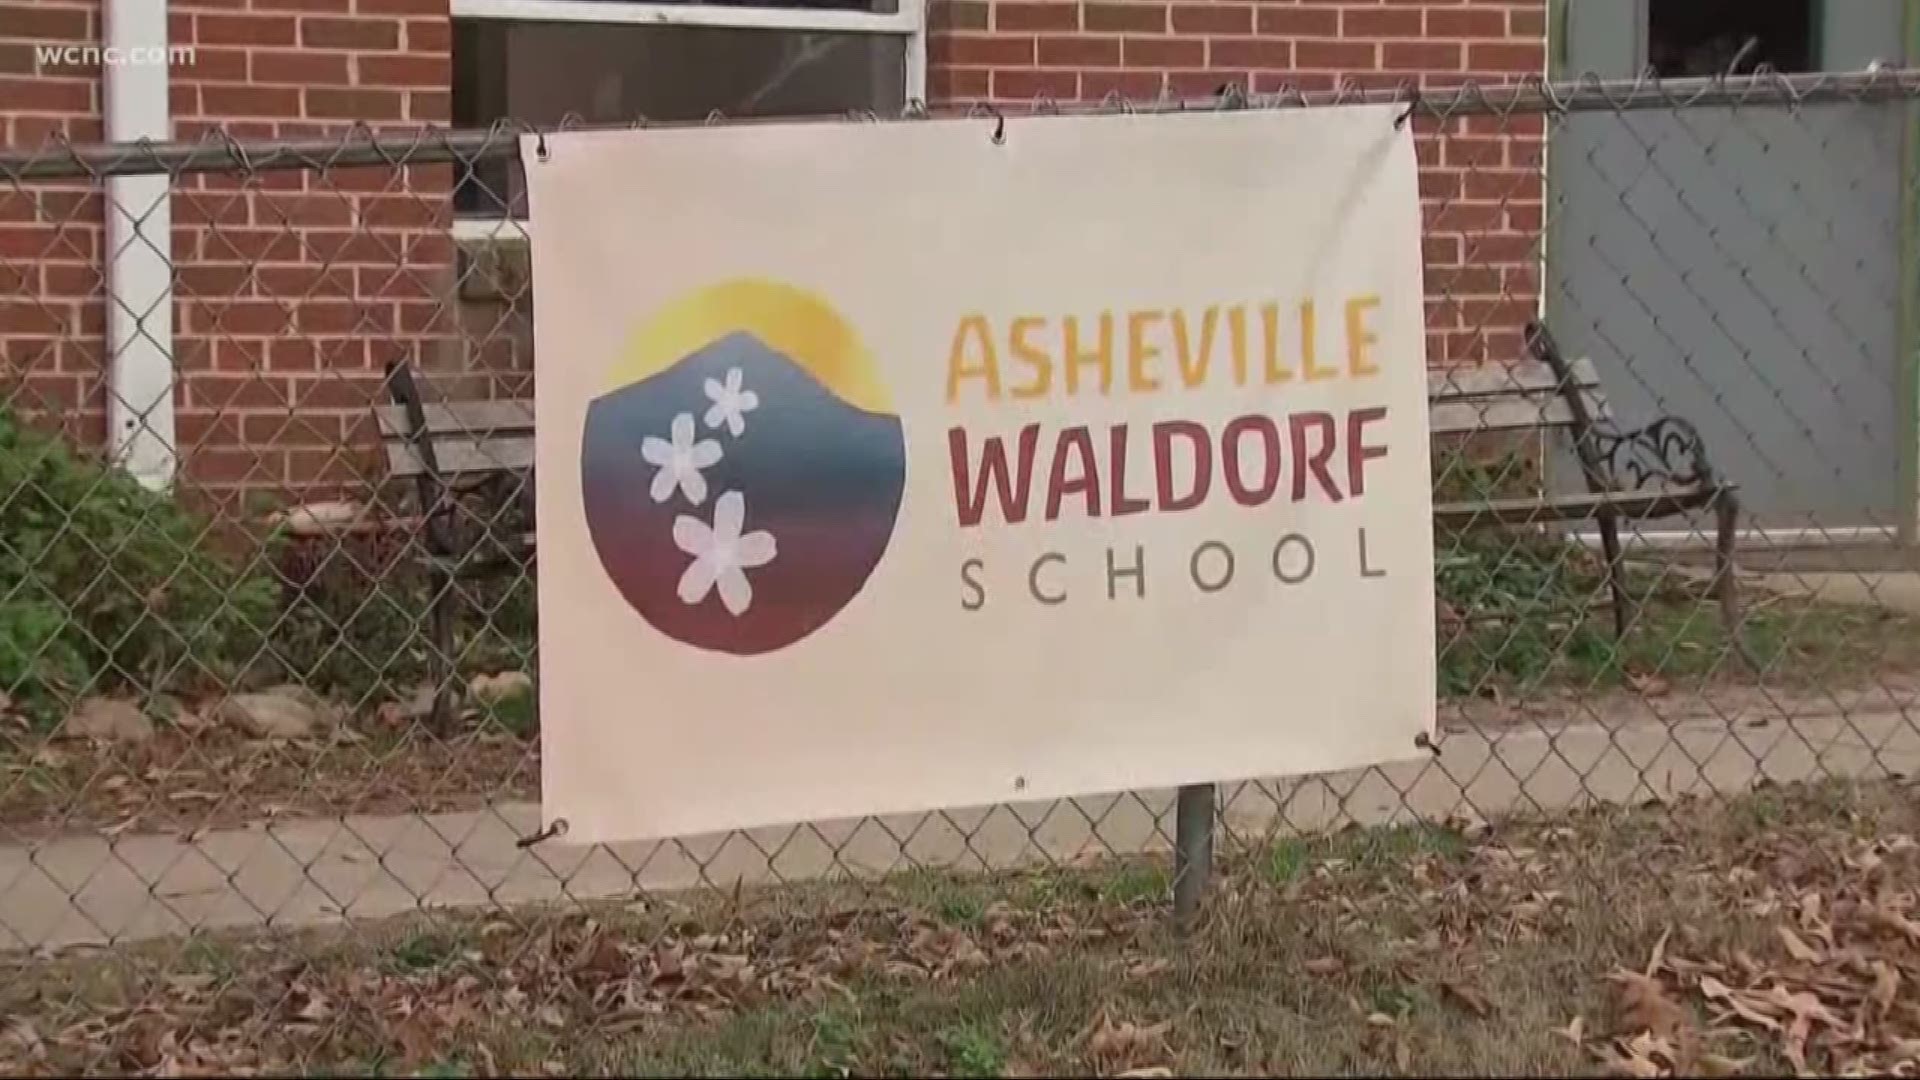 The Asheville Citizen Times reported four new cases, but it's unclear whether they are parents or strangers that students came in contact with.